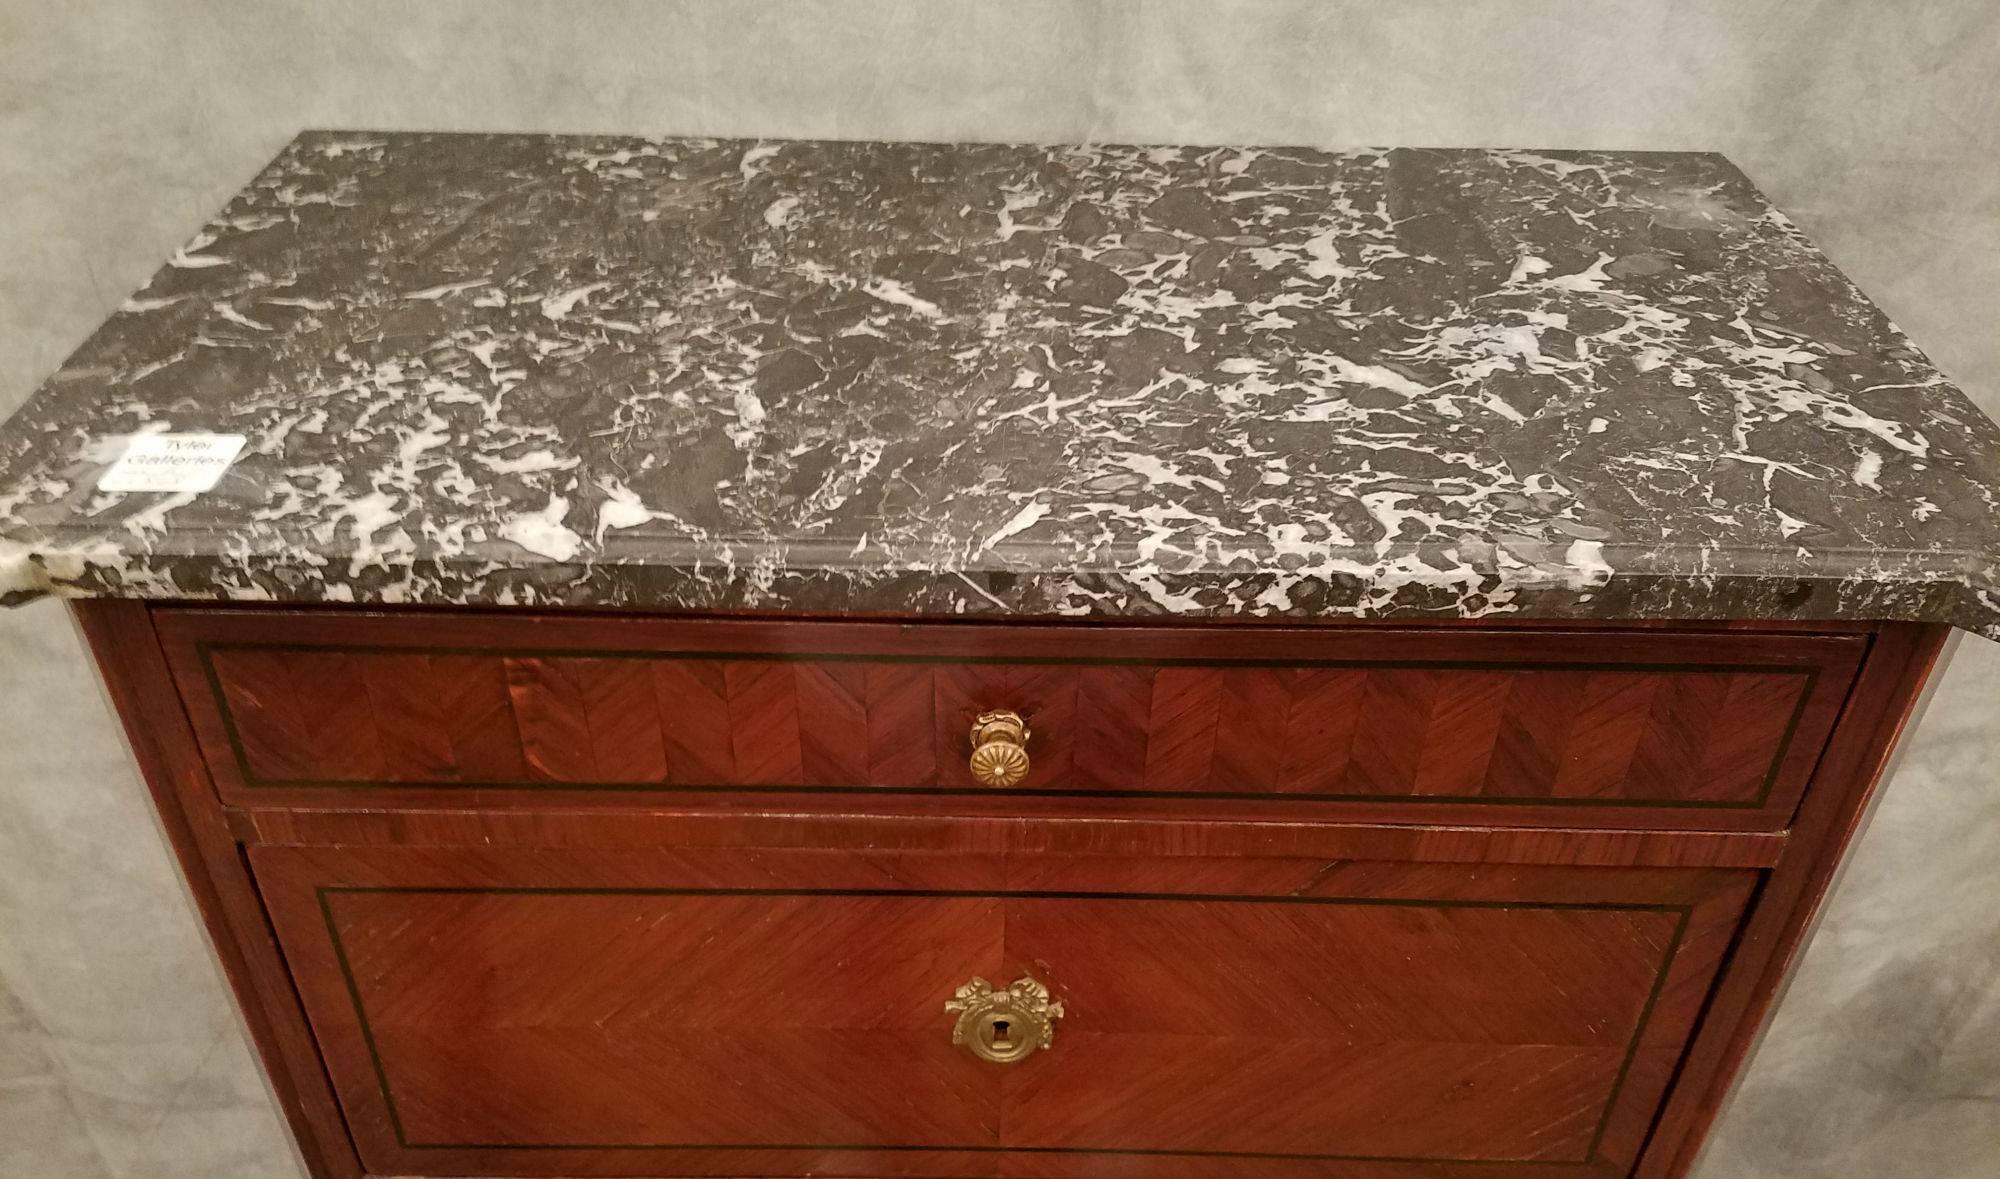 19th Century French Marble-Top Semainier In Good Condition For Sale In Miami, FL